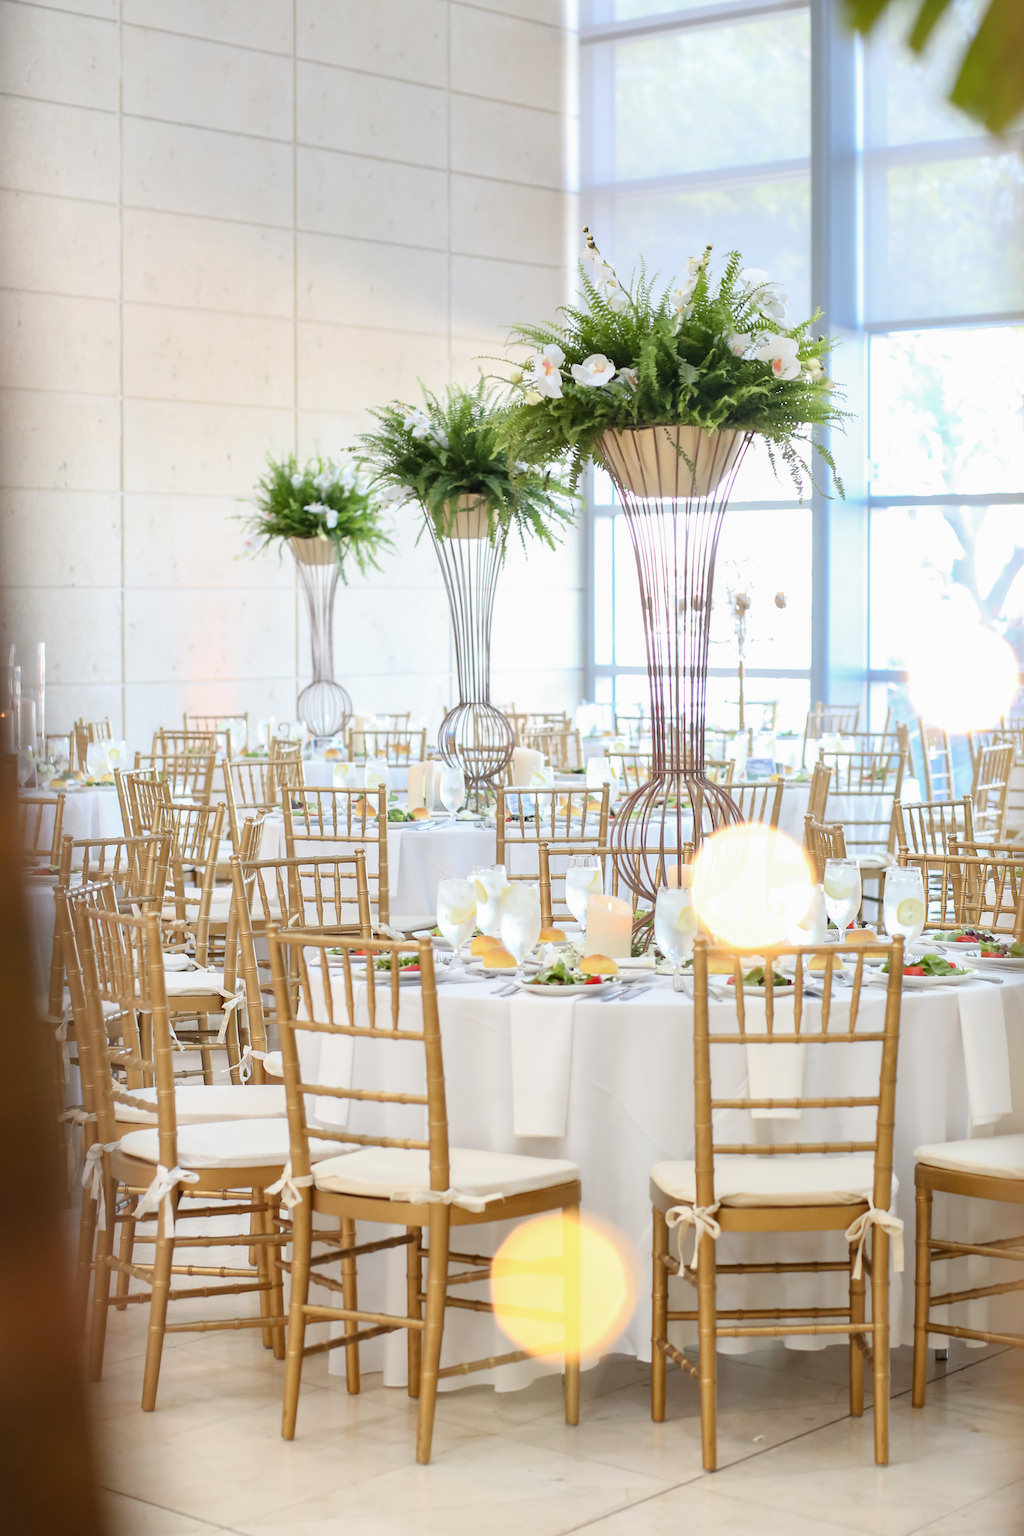 Wedding Reception Decor, Round Tables with White Tablecloths, Gold Chiavari Chairs, Tall Geometric Vase with Greenery and White Orchids Centerpiece | Tampa Bay Photographer Lifelong Photography Studios | St. Petersburg Venue Fine Arts Museum